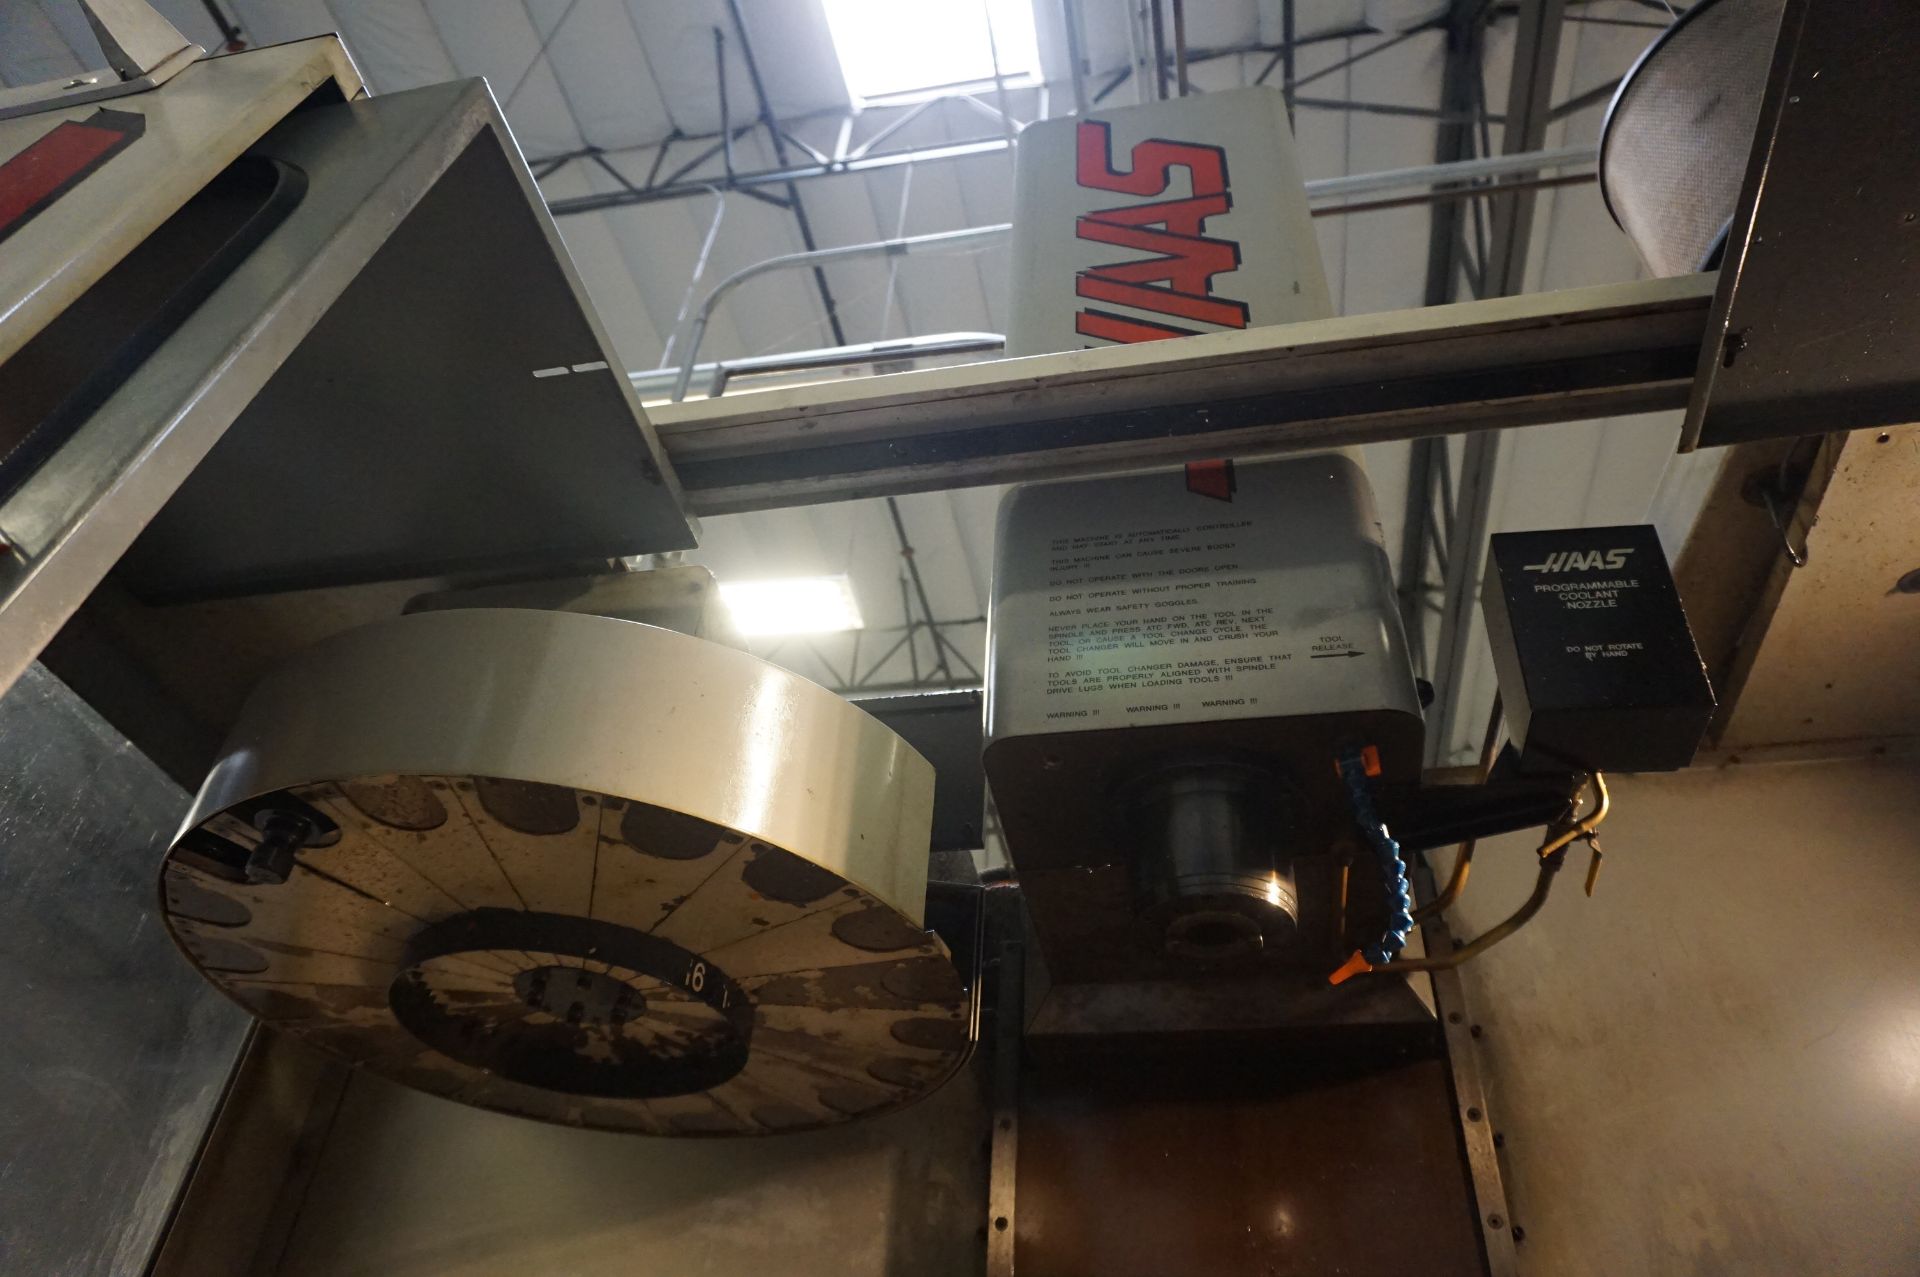 1999 HAAS VF-2 VERTICAL MACHINING CENTER, S/N 17306, PROGRAMMABLE COOLANT, ROYAL MISTBUSTER, 20 ATC - Image 8 of 11